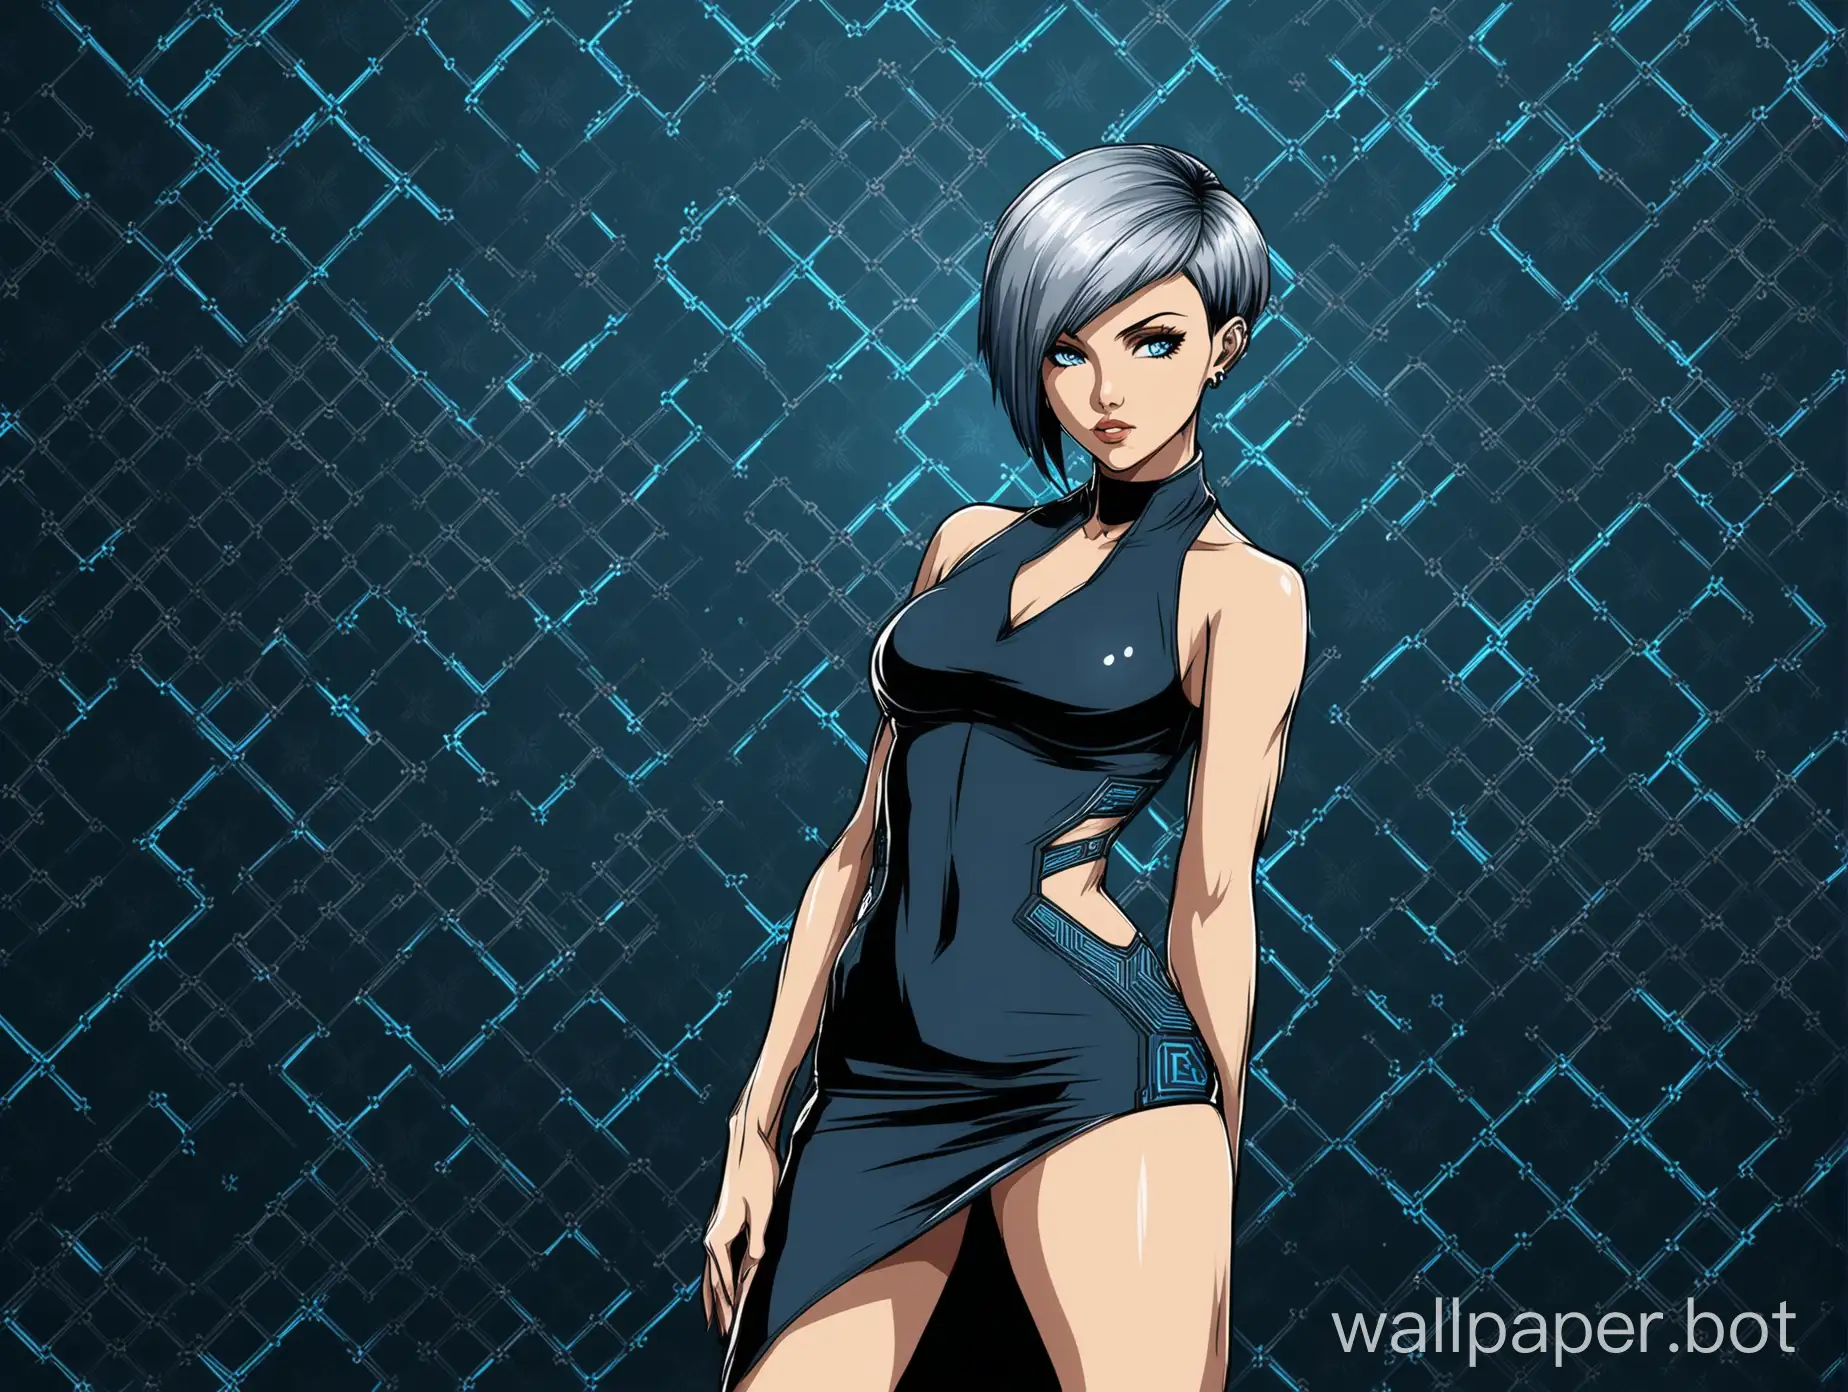 Design a captivating wallpaper featuring a sultry anime female character with a short blue hairstyle similar to Ruby Rose's character in 'XXX Return of Xander Cage'. Her blue short hairstyle should be vibrant and electric. The character should exude confidence and charisma, with a seductive yet edgy look that reflects her personality. Her silver short hairstyle should be sleek and modern, adding to her bold and dynamic appearance. Dress her in a fitted crop top that accentuates her curvy physique, paired with a sleek bodycon skirt that hugs her figure. Enhance her sexiness with subtle yet alluring poses and expressions. Incorporate elements of Arch Linux, such as the logo or color scheme, into the background or accessories to give the wallpaper a tech-inspired edge. The background should be monochromatic, clean, and mineralistic, with subtle textures to add depth and interest while maintaining a minimalist aesthetic